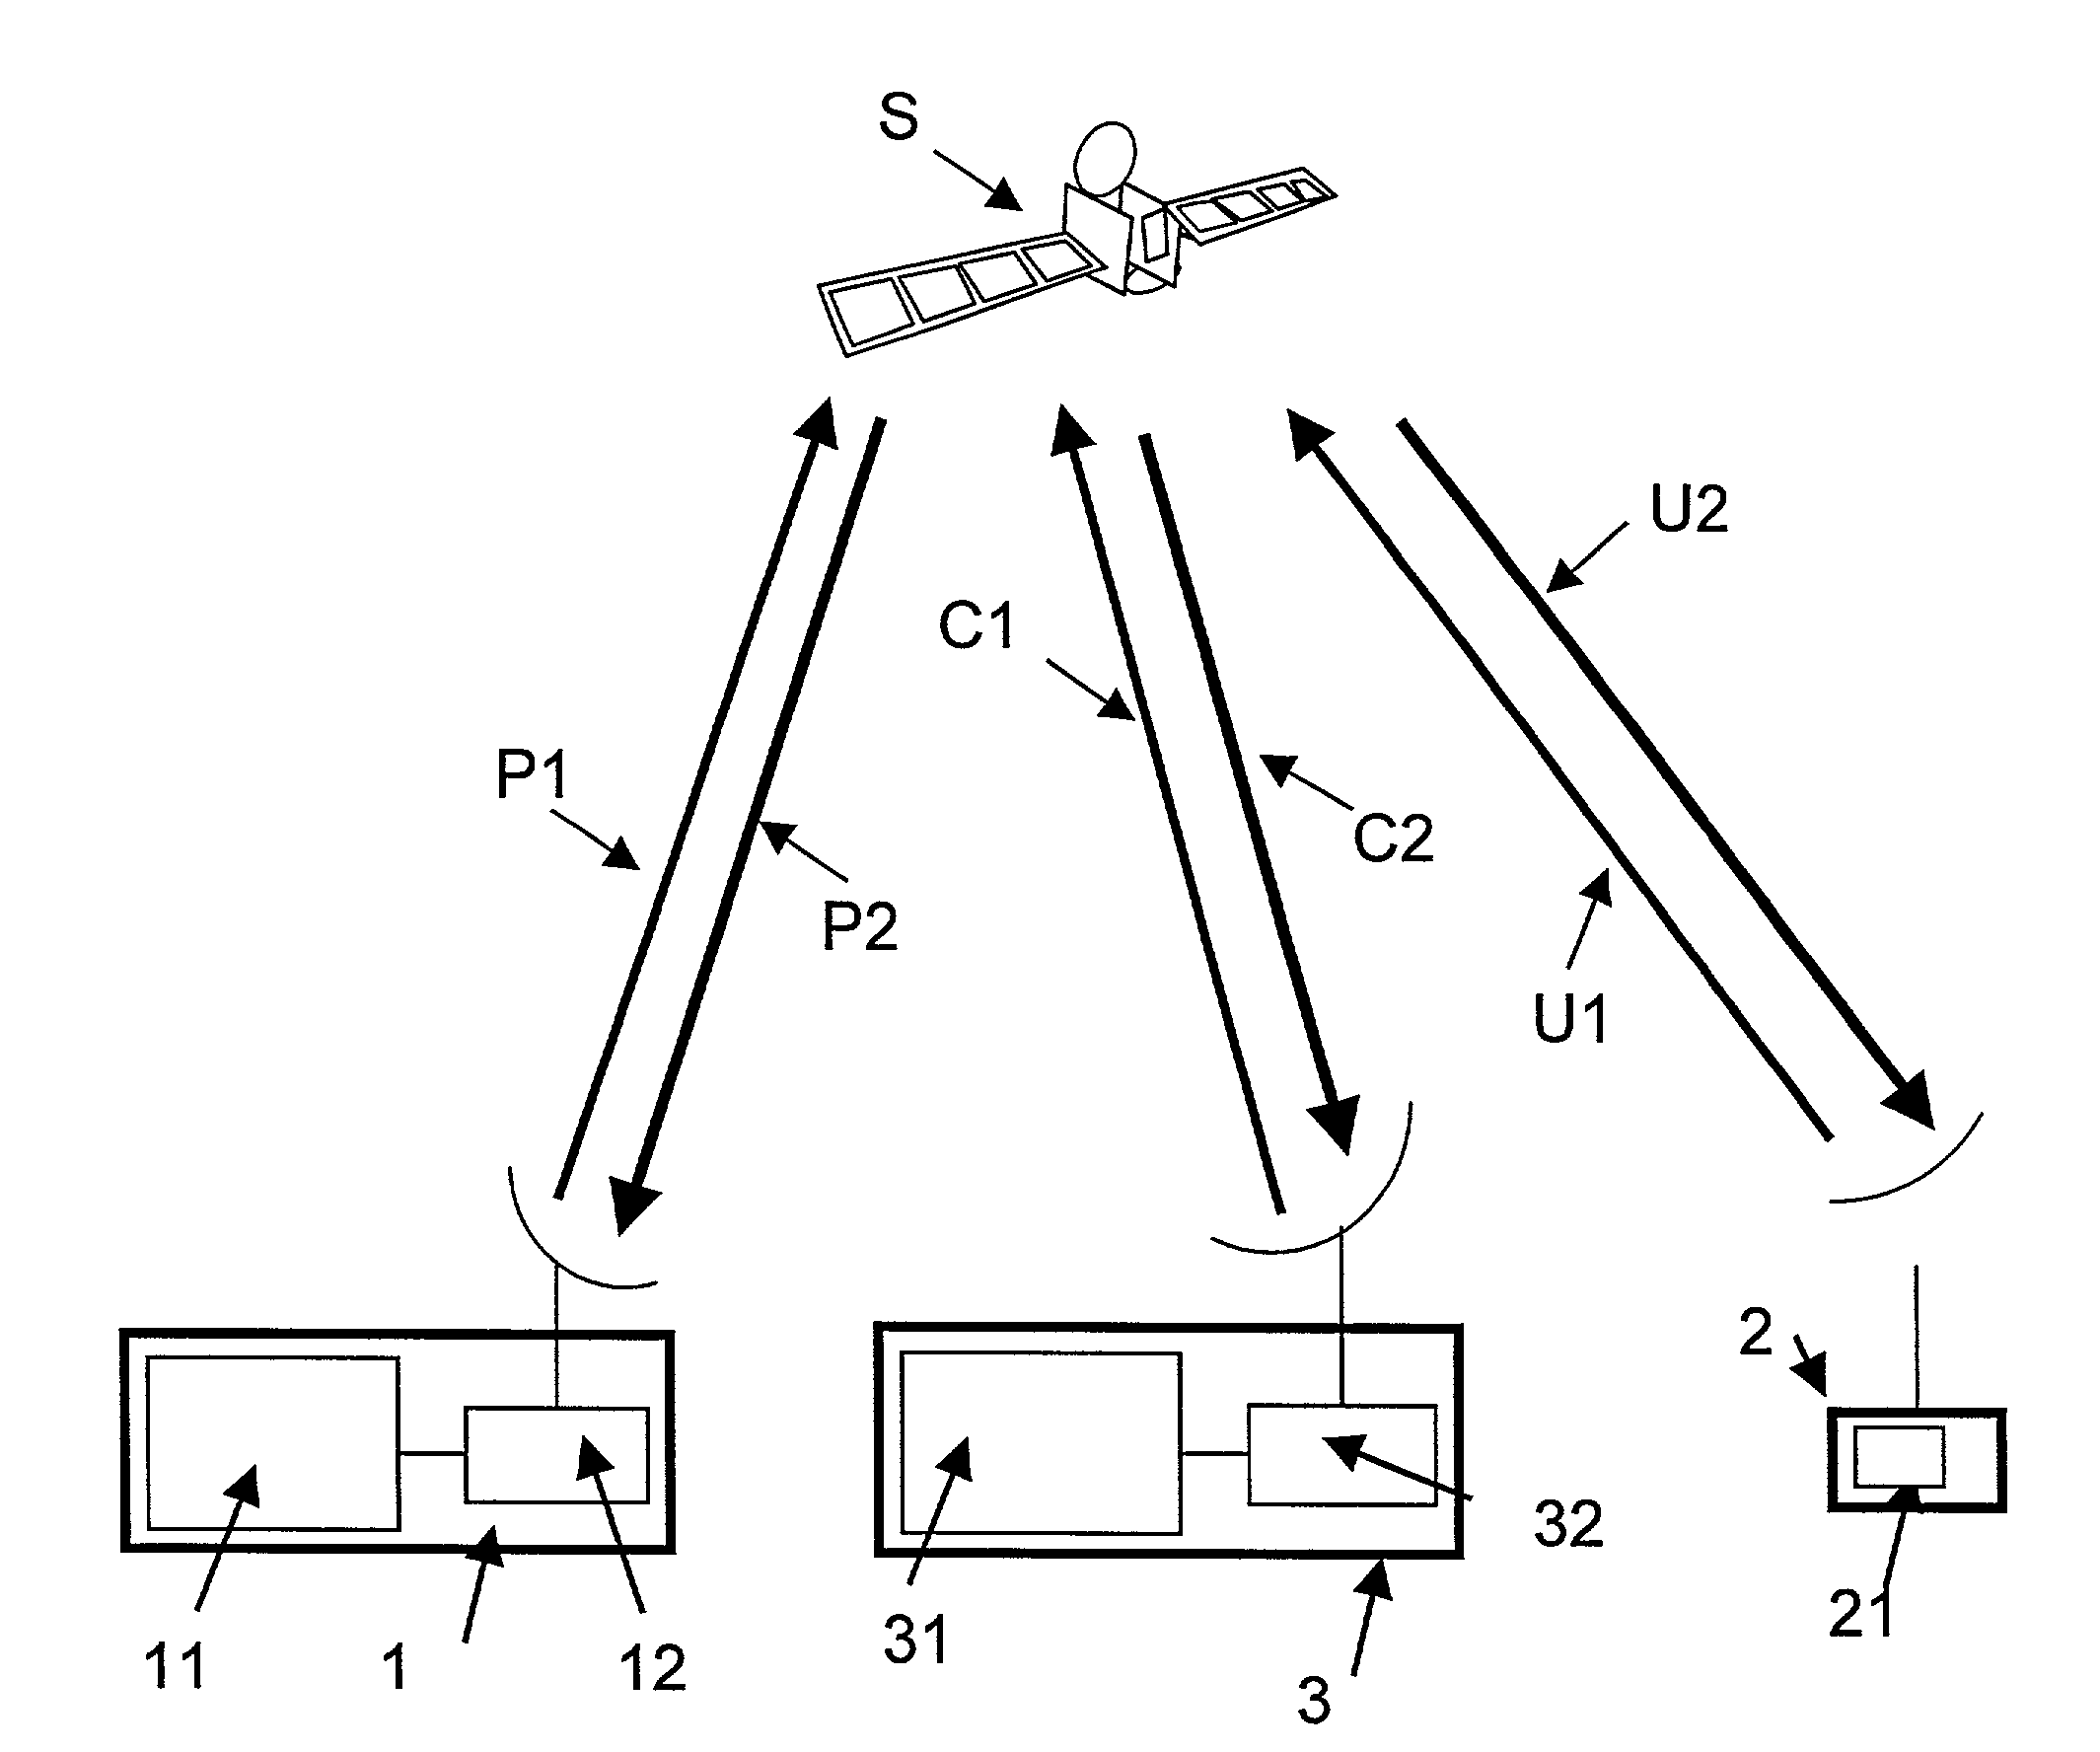 System and method of common synchronisation for bursts transmitted over an uplink connection in an integrated multispot satellite communication system in a multimedia broadcasting network